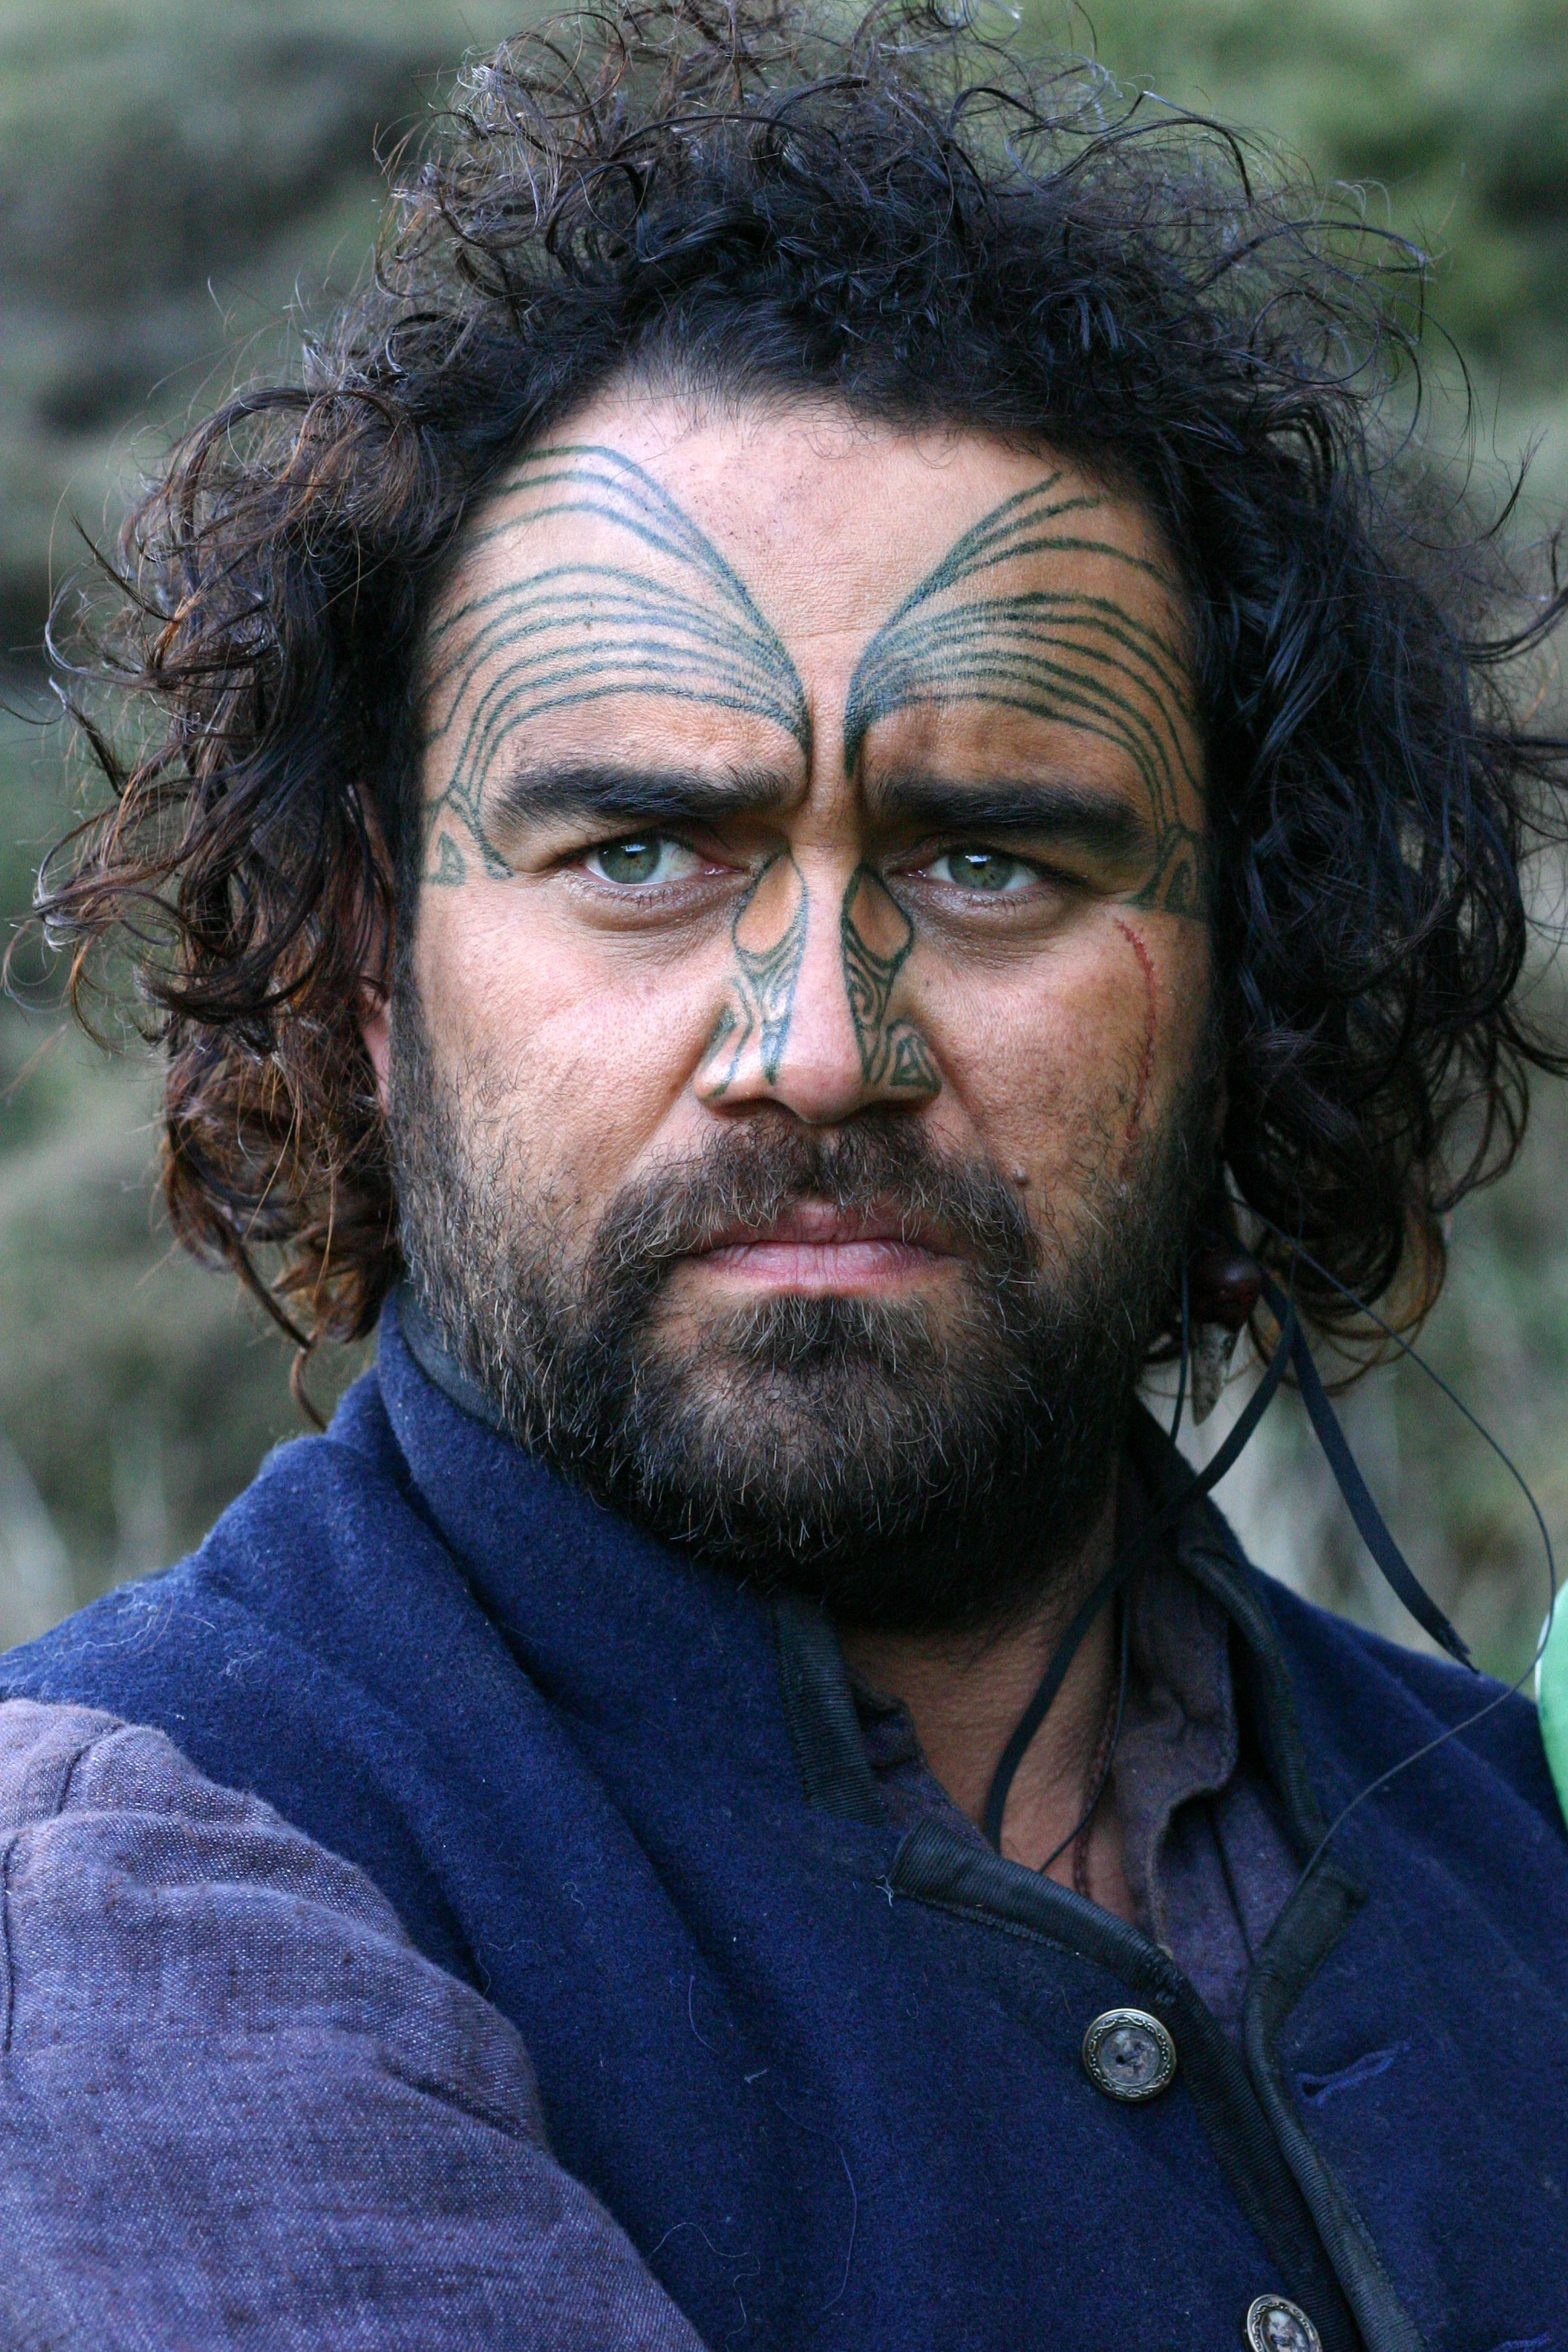 Grant as Te Kahu from the NZ television series The Lost Children